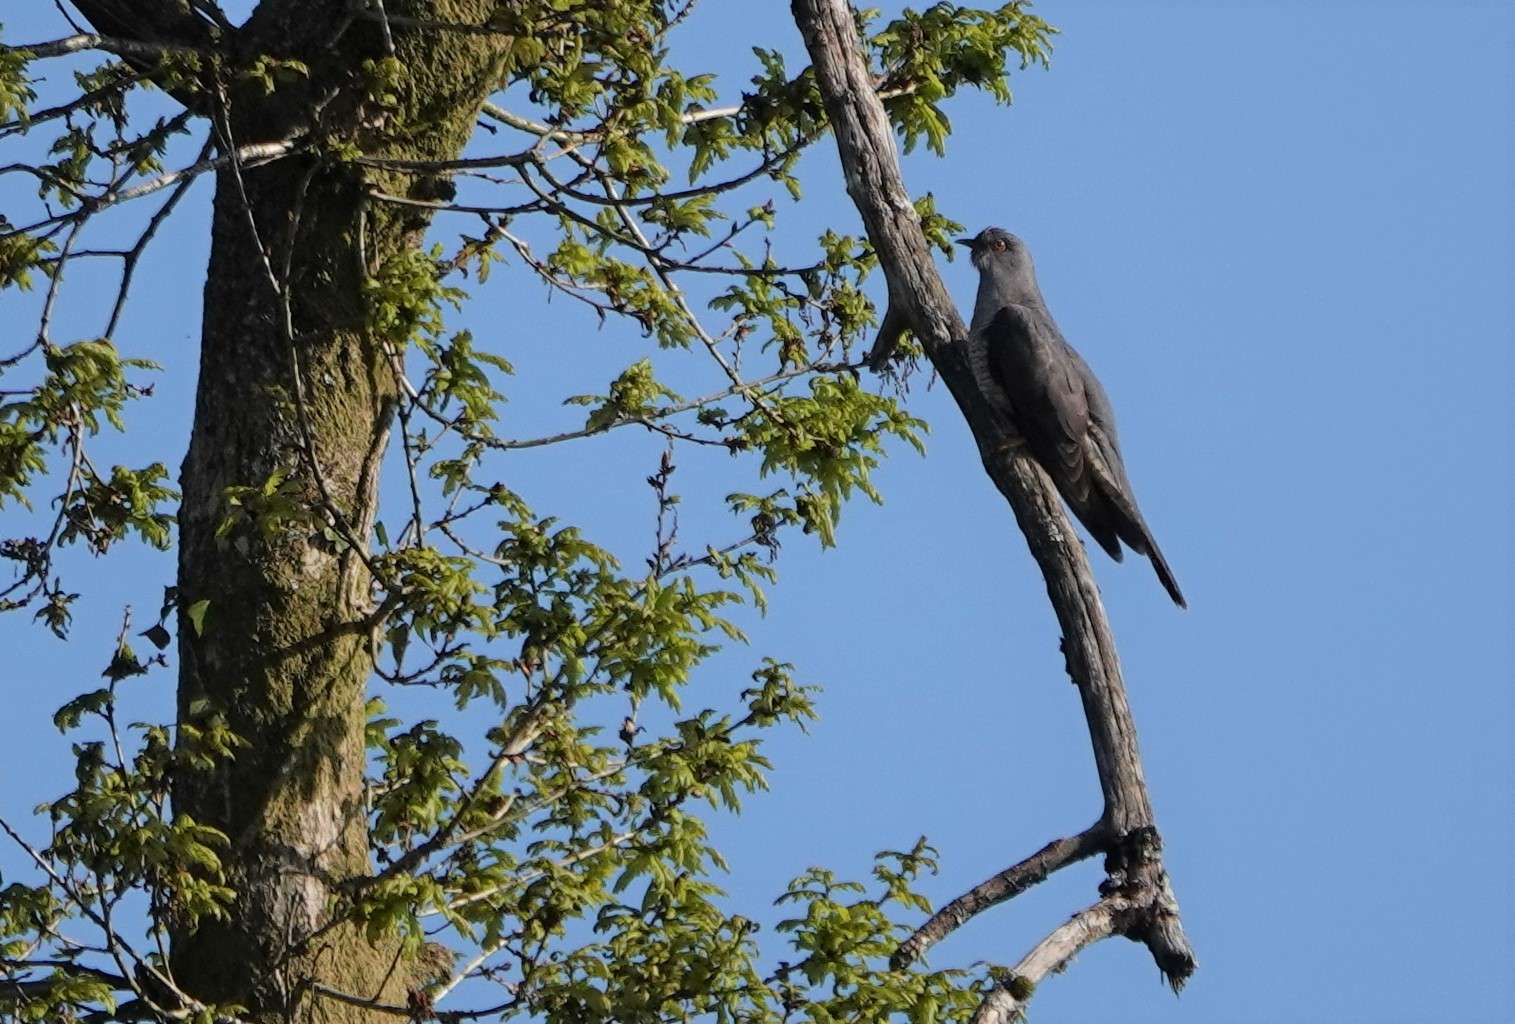 Cuckoo by Paul Howrihane at Cookworthy Forest